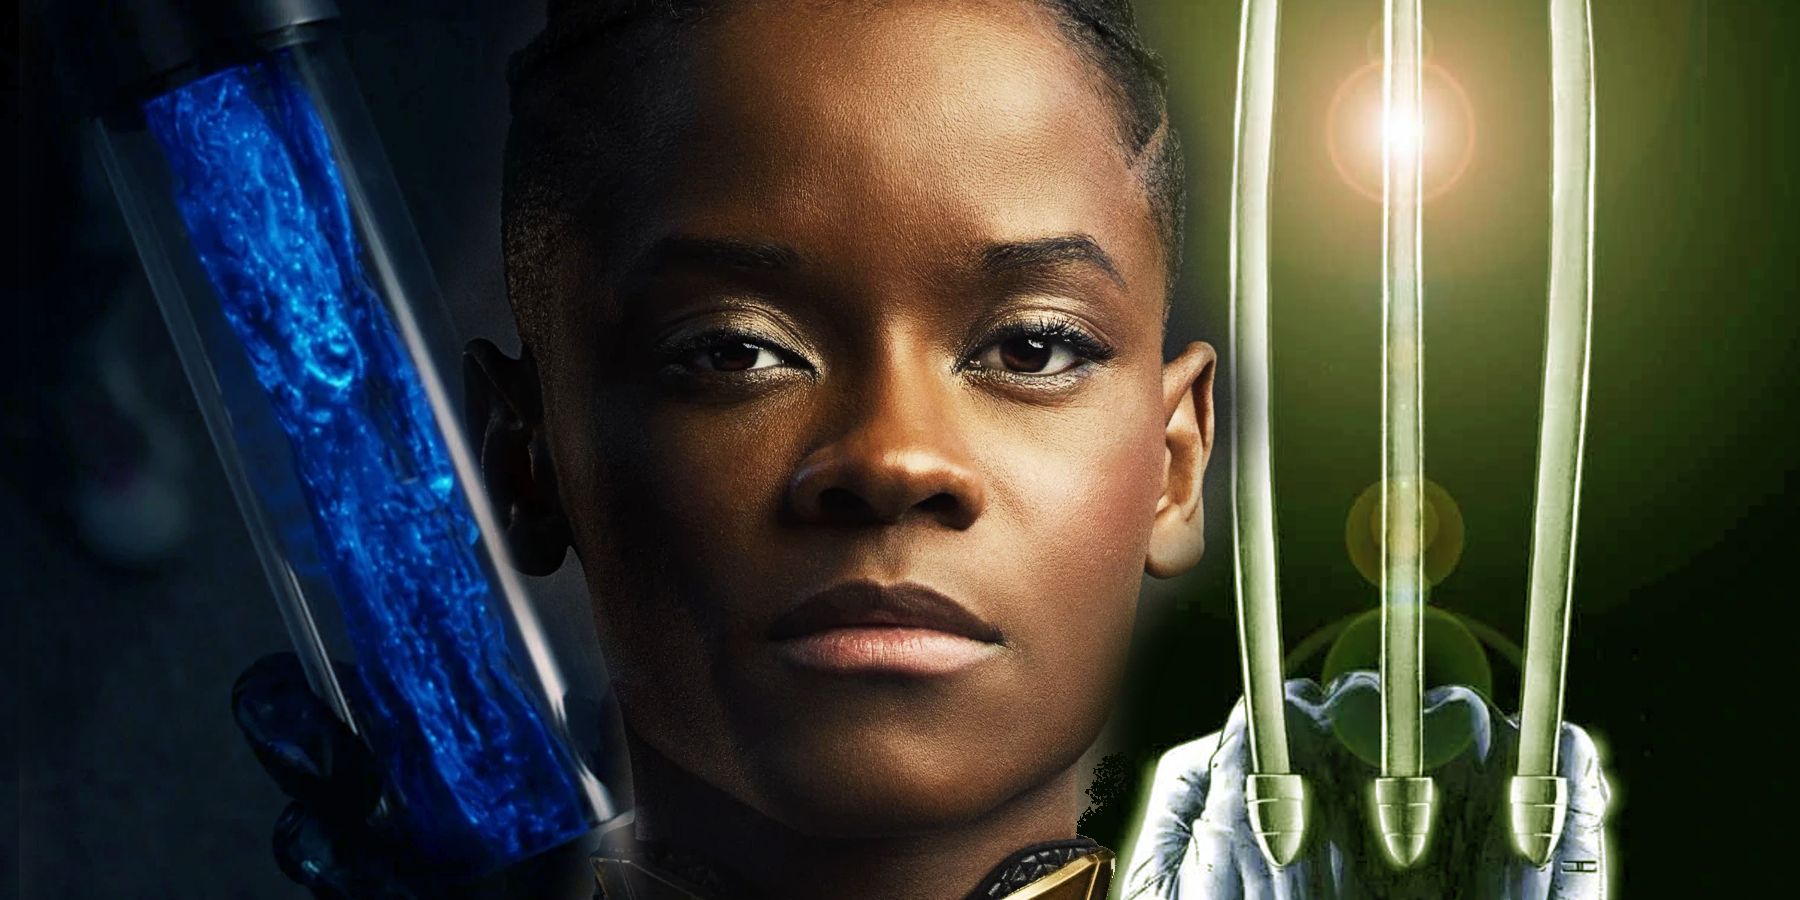 Split Image: Vibranium sample from Age of Ultron; Letitia Wright poses as Shuri in Black Panther Wakanda Forever; Wolverine's adamantium claws extend